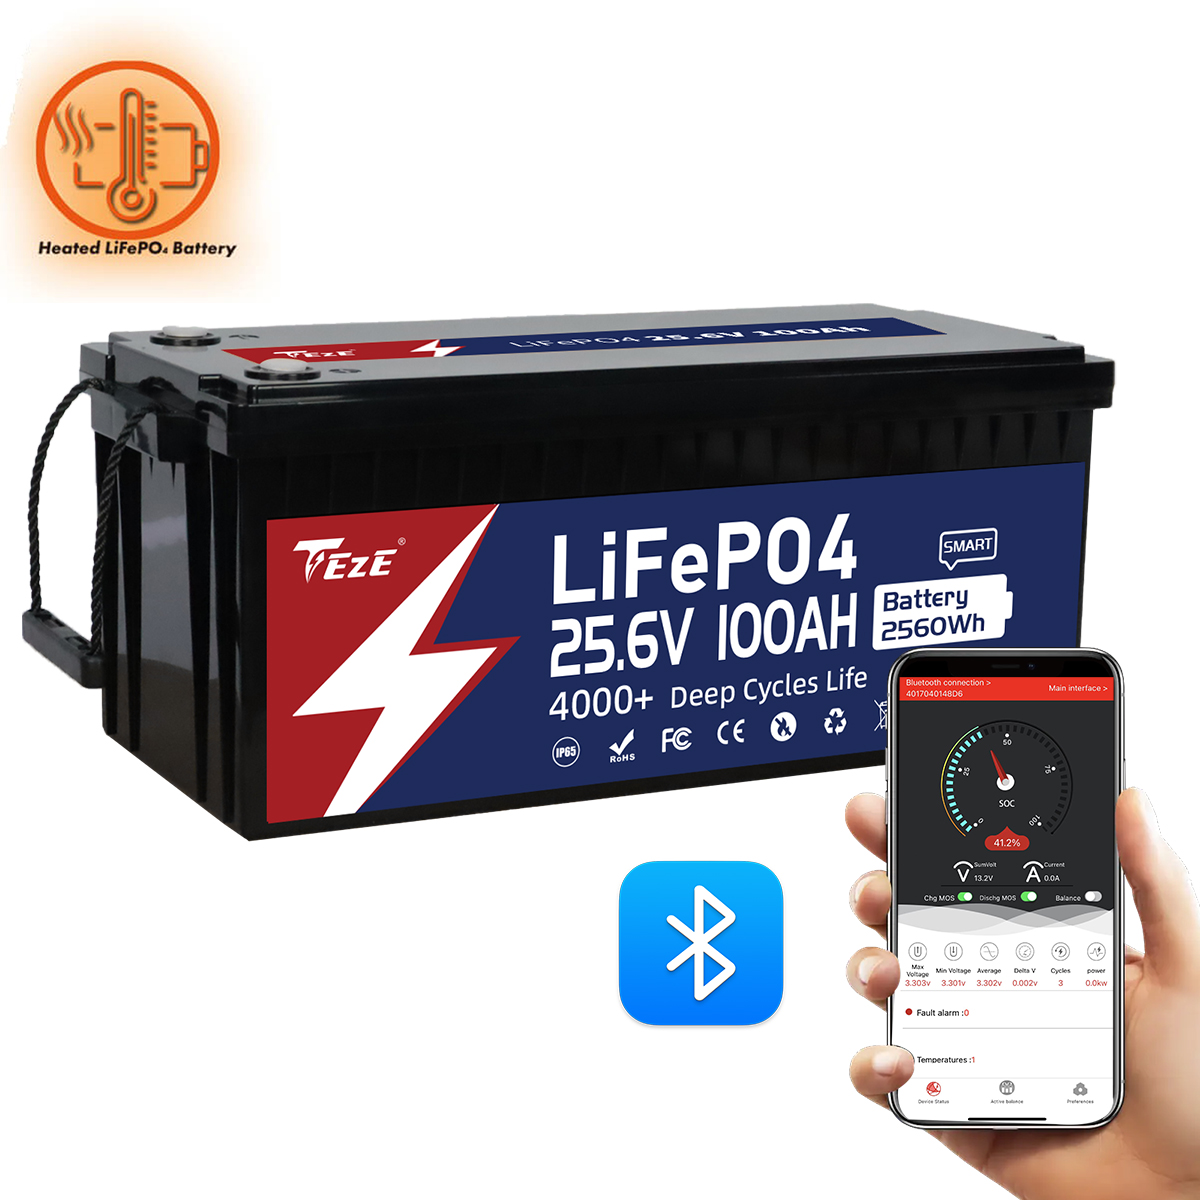 TezePower 24V 100Ah LiFePO4 Battery with Bluetooth, Self-heating and Active Balancer, Built-in 100A Daly BMS(Bluetooth Built-in Version)